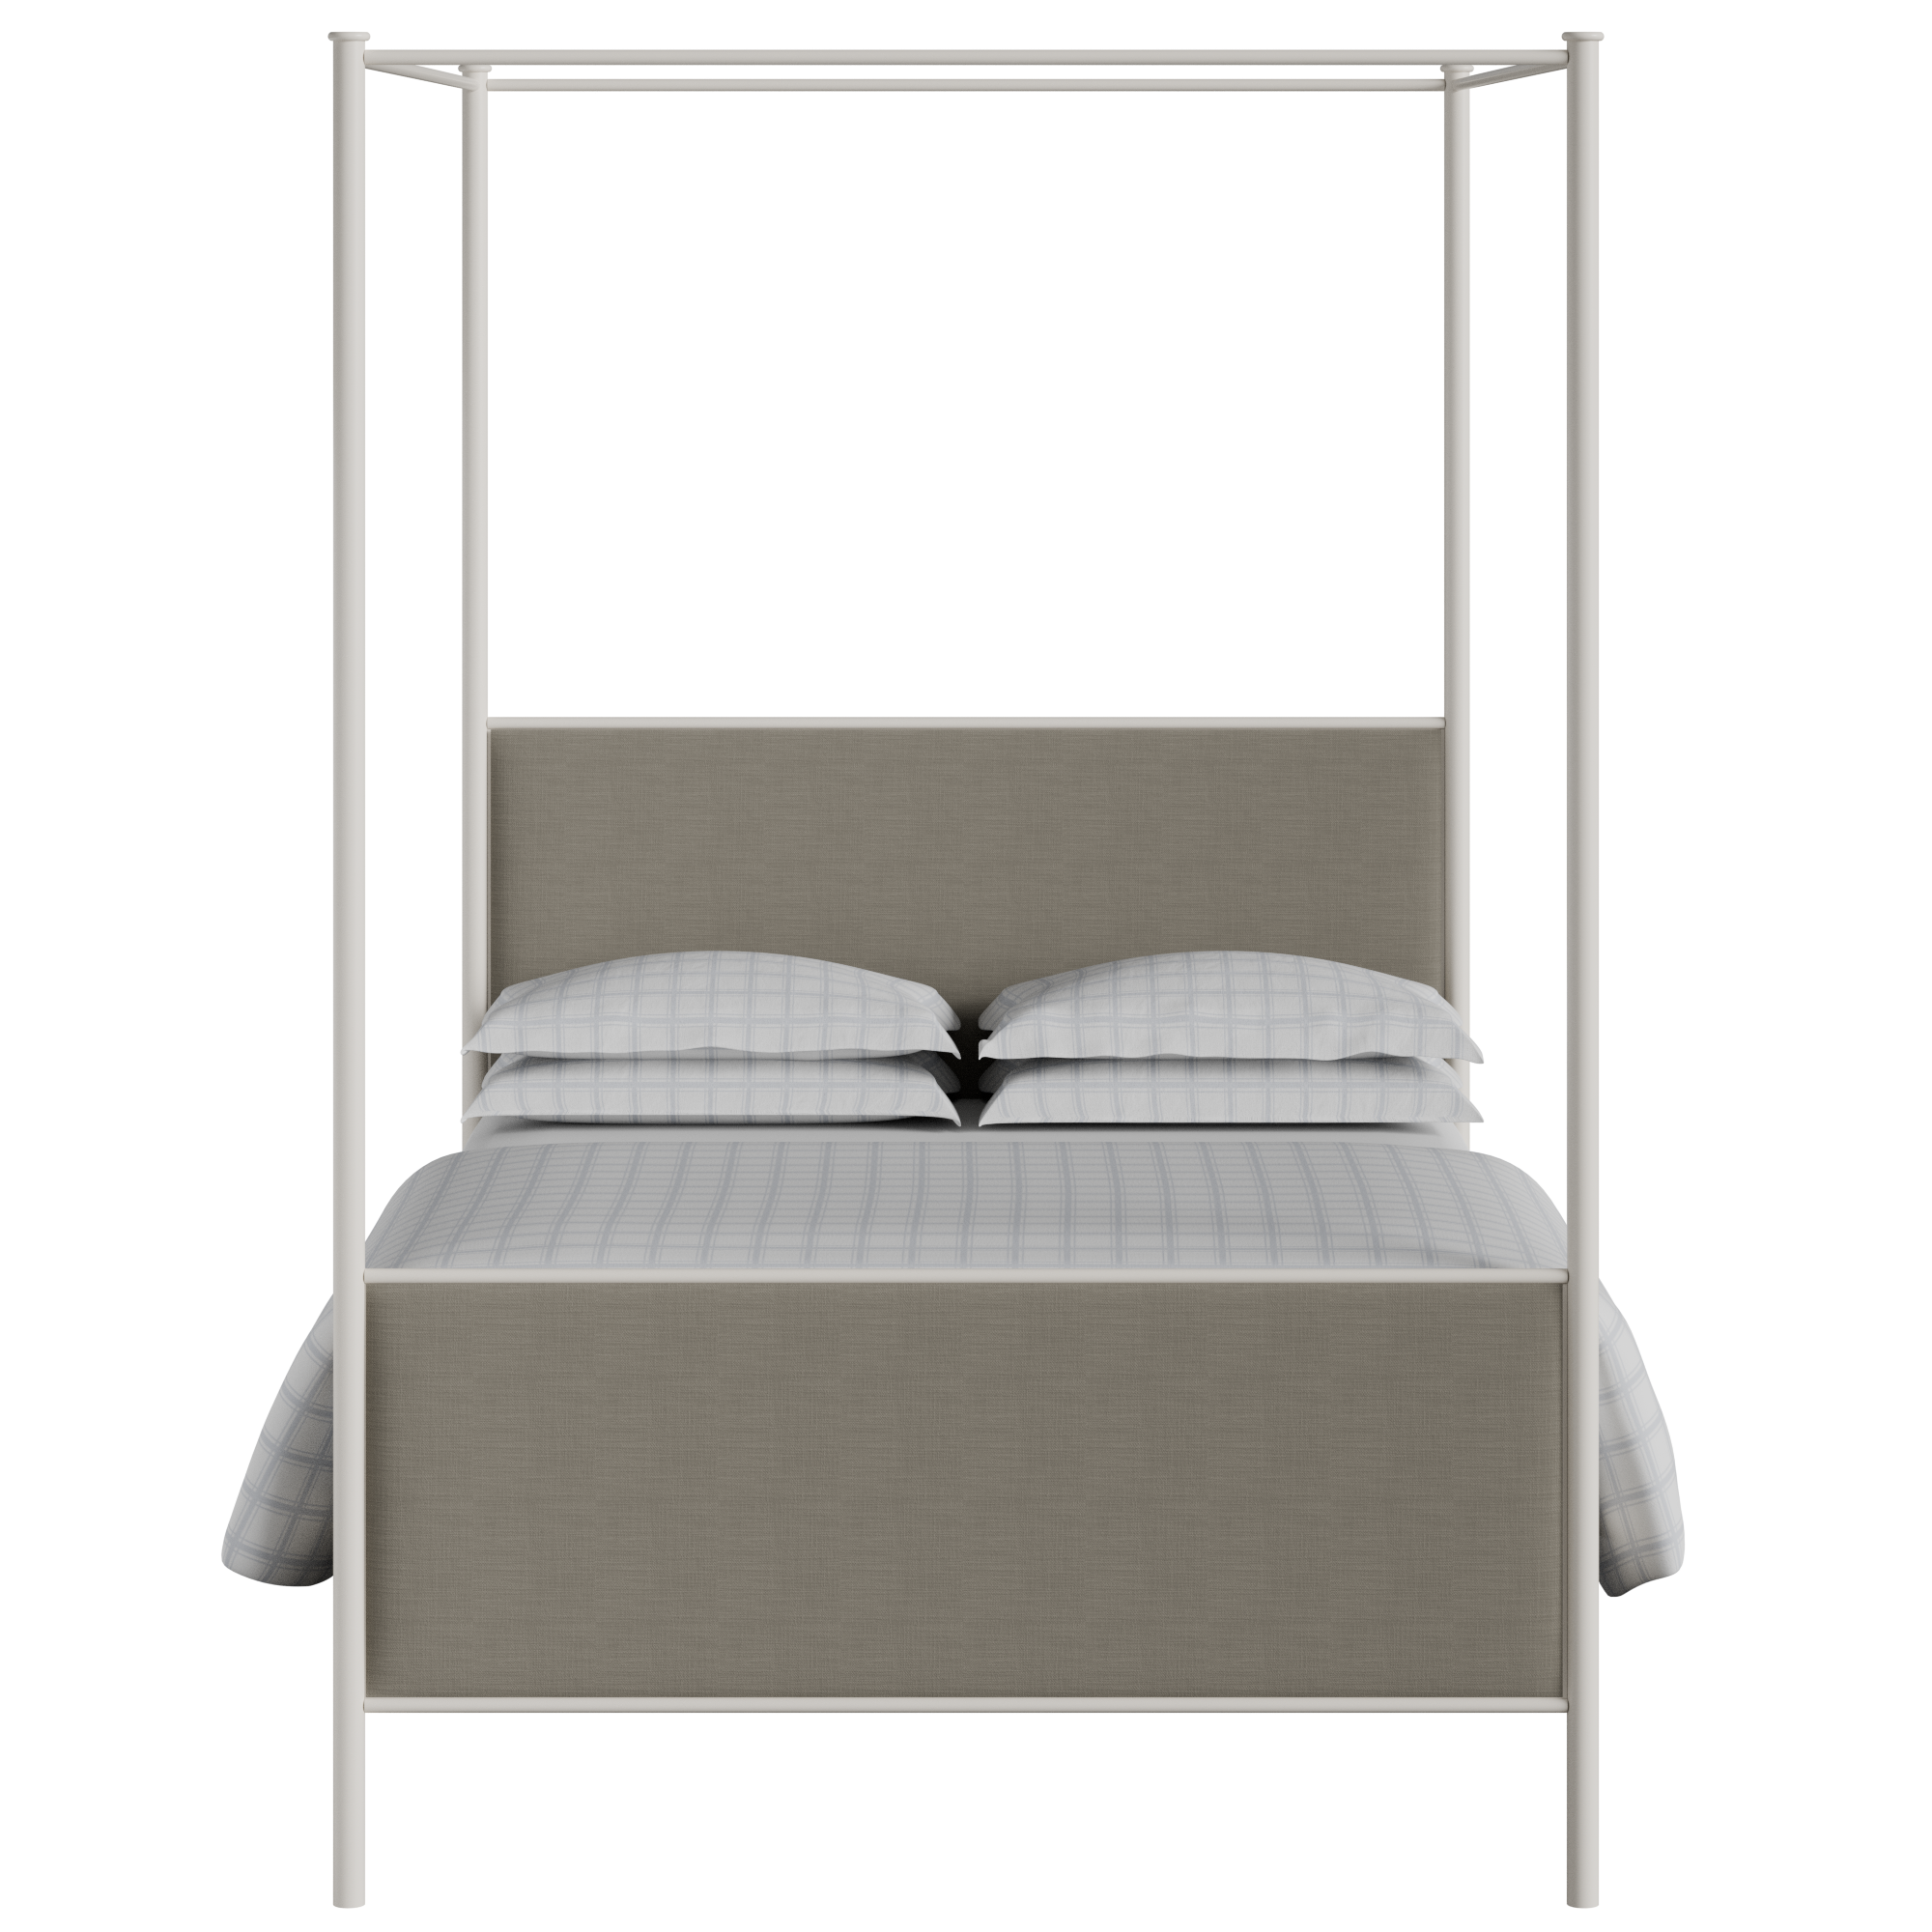 Reims iron/metal upholstered bed in ivory with grey fabric